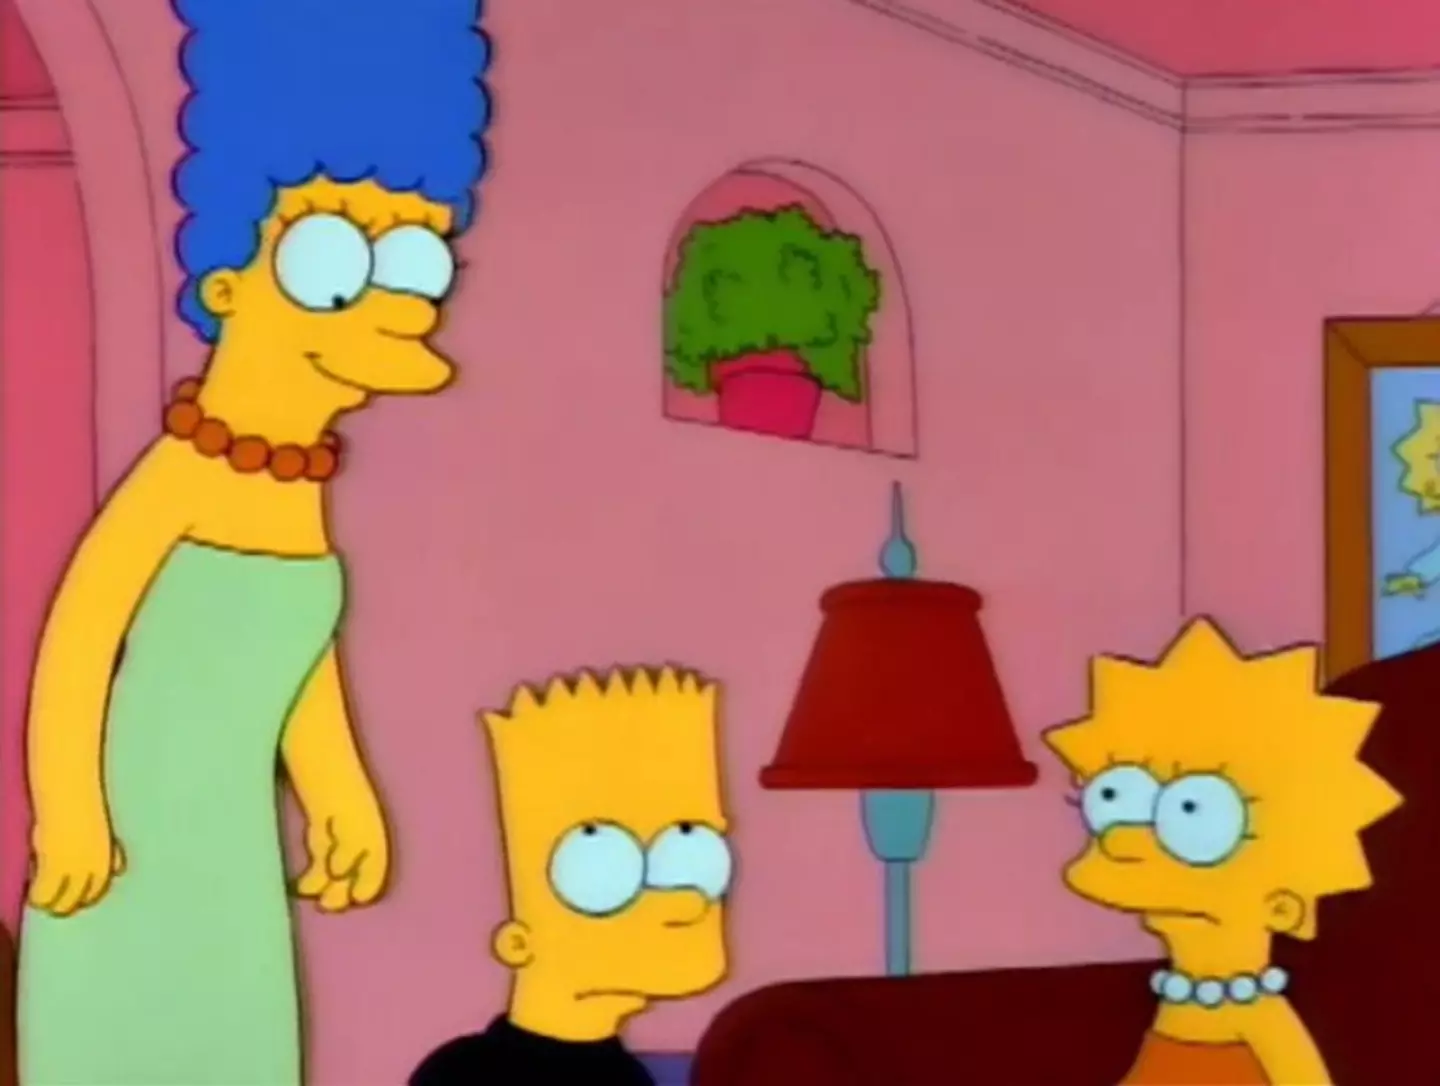 A video editor has uncovered a joke from The Simpsons kept hidden all this time.